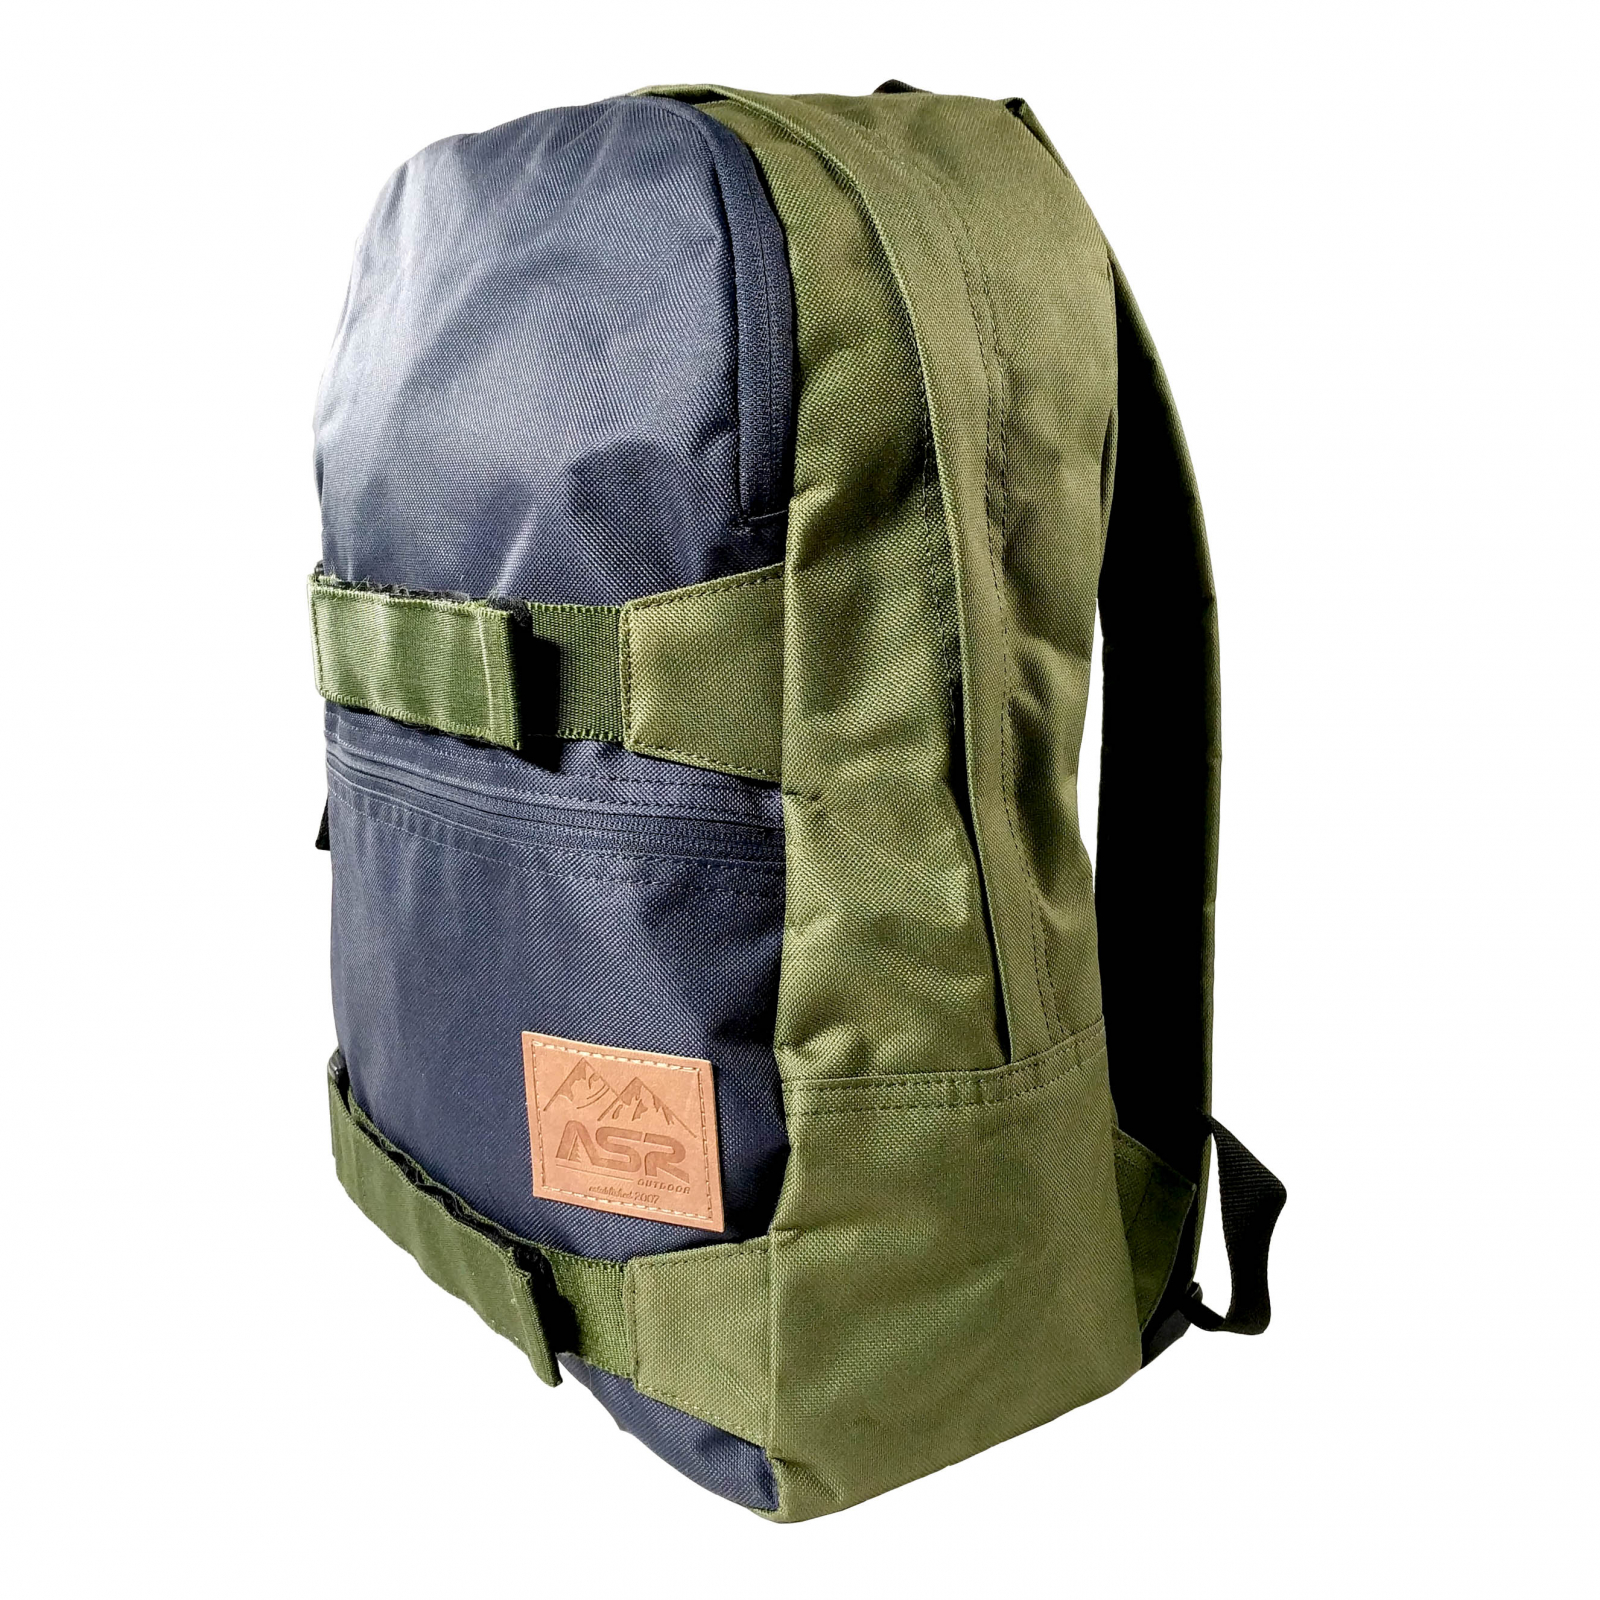 ASR Outdoor 19L Griptape Backpack Dual Zip Two Tone Navy OD Green - image 2 of 7